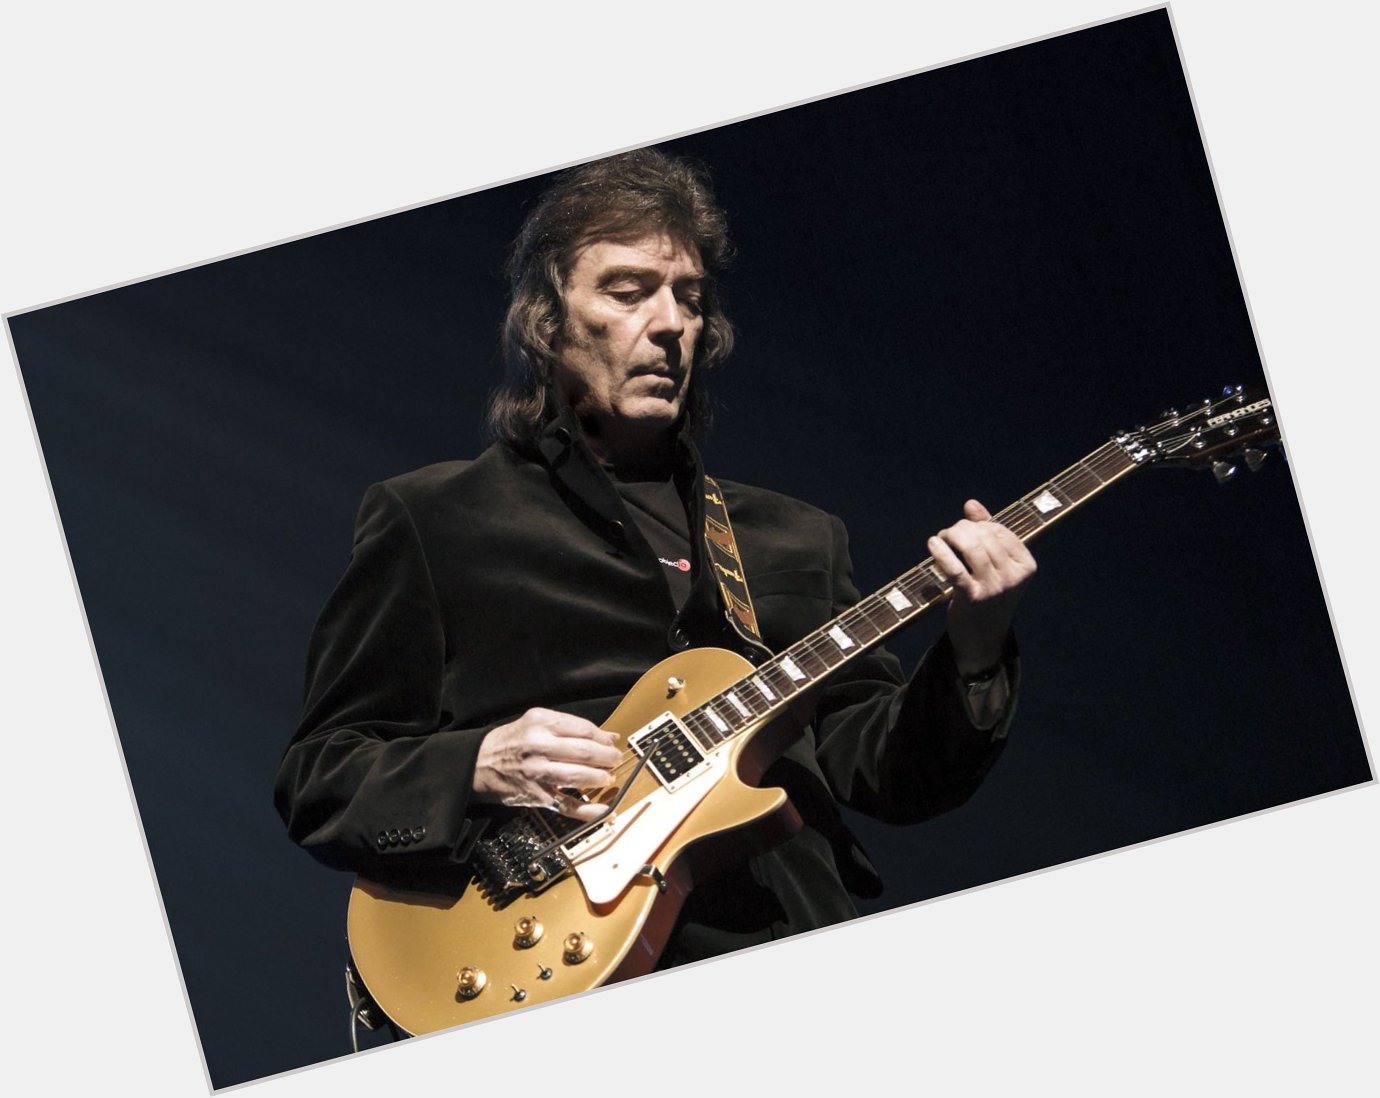 We would like to wish a very happy birthday to the great Steve Hackett! 